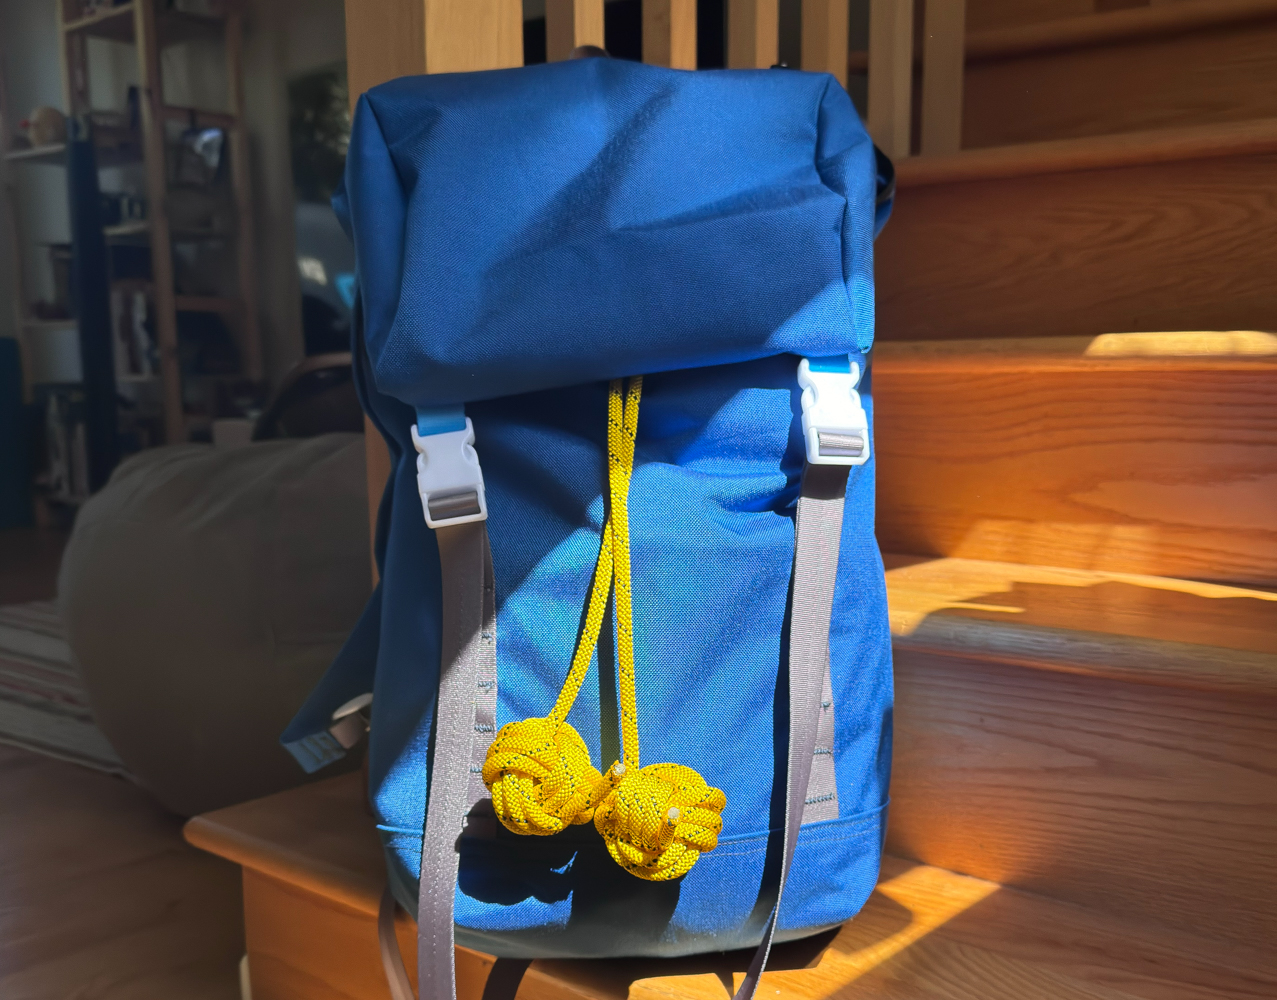 I’ve started sewing bags! My foray into full packs is Rucksack #1, a bright blue cheery bag for a month-long trip to Boston.